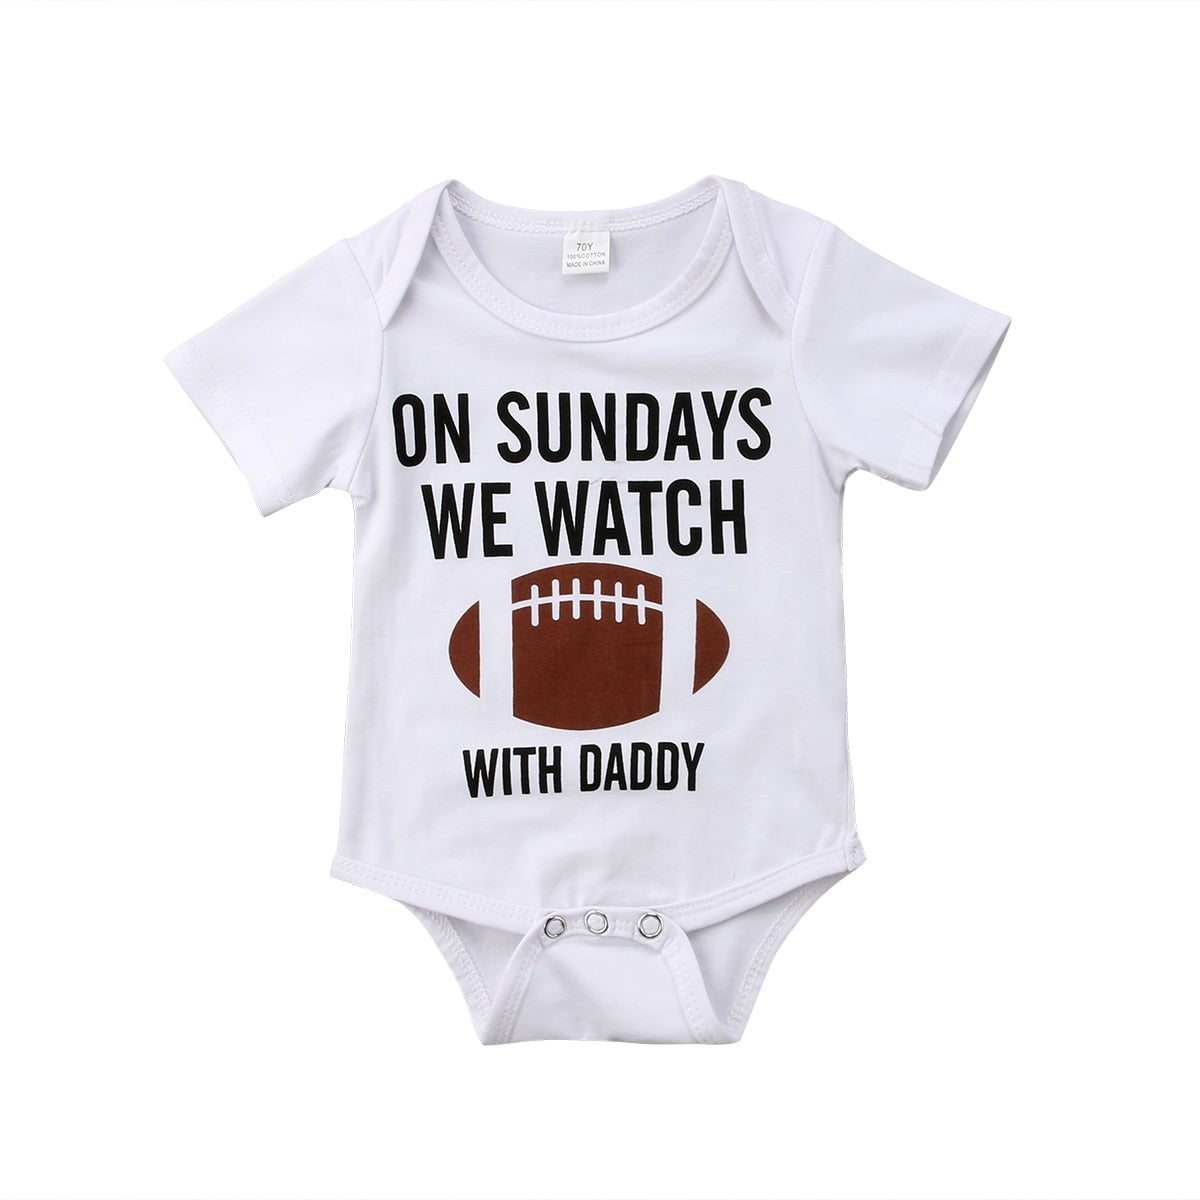 Summer Newborn Infant Baby Boy/ Girl Clothes Short Sleeve Letter Romper Jumpsuit Playsuit Outfits